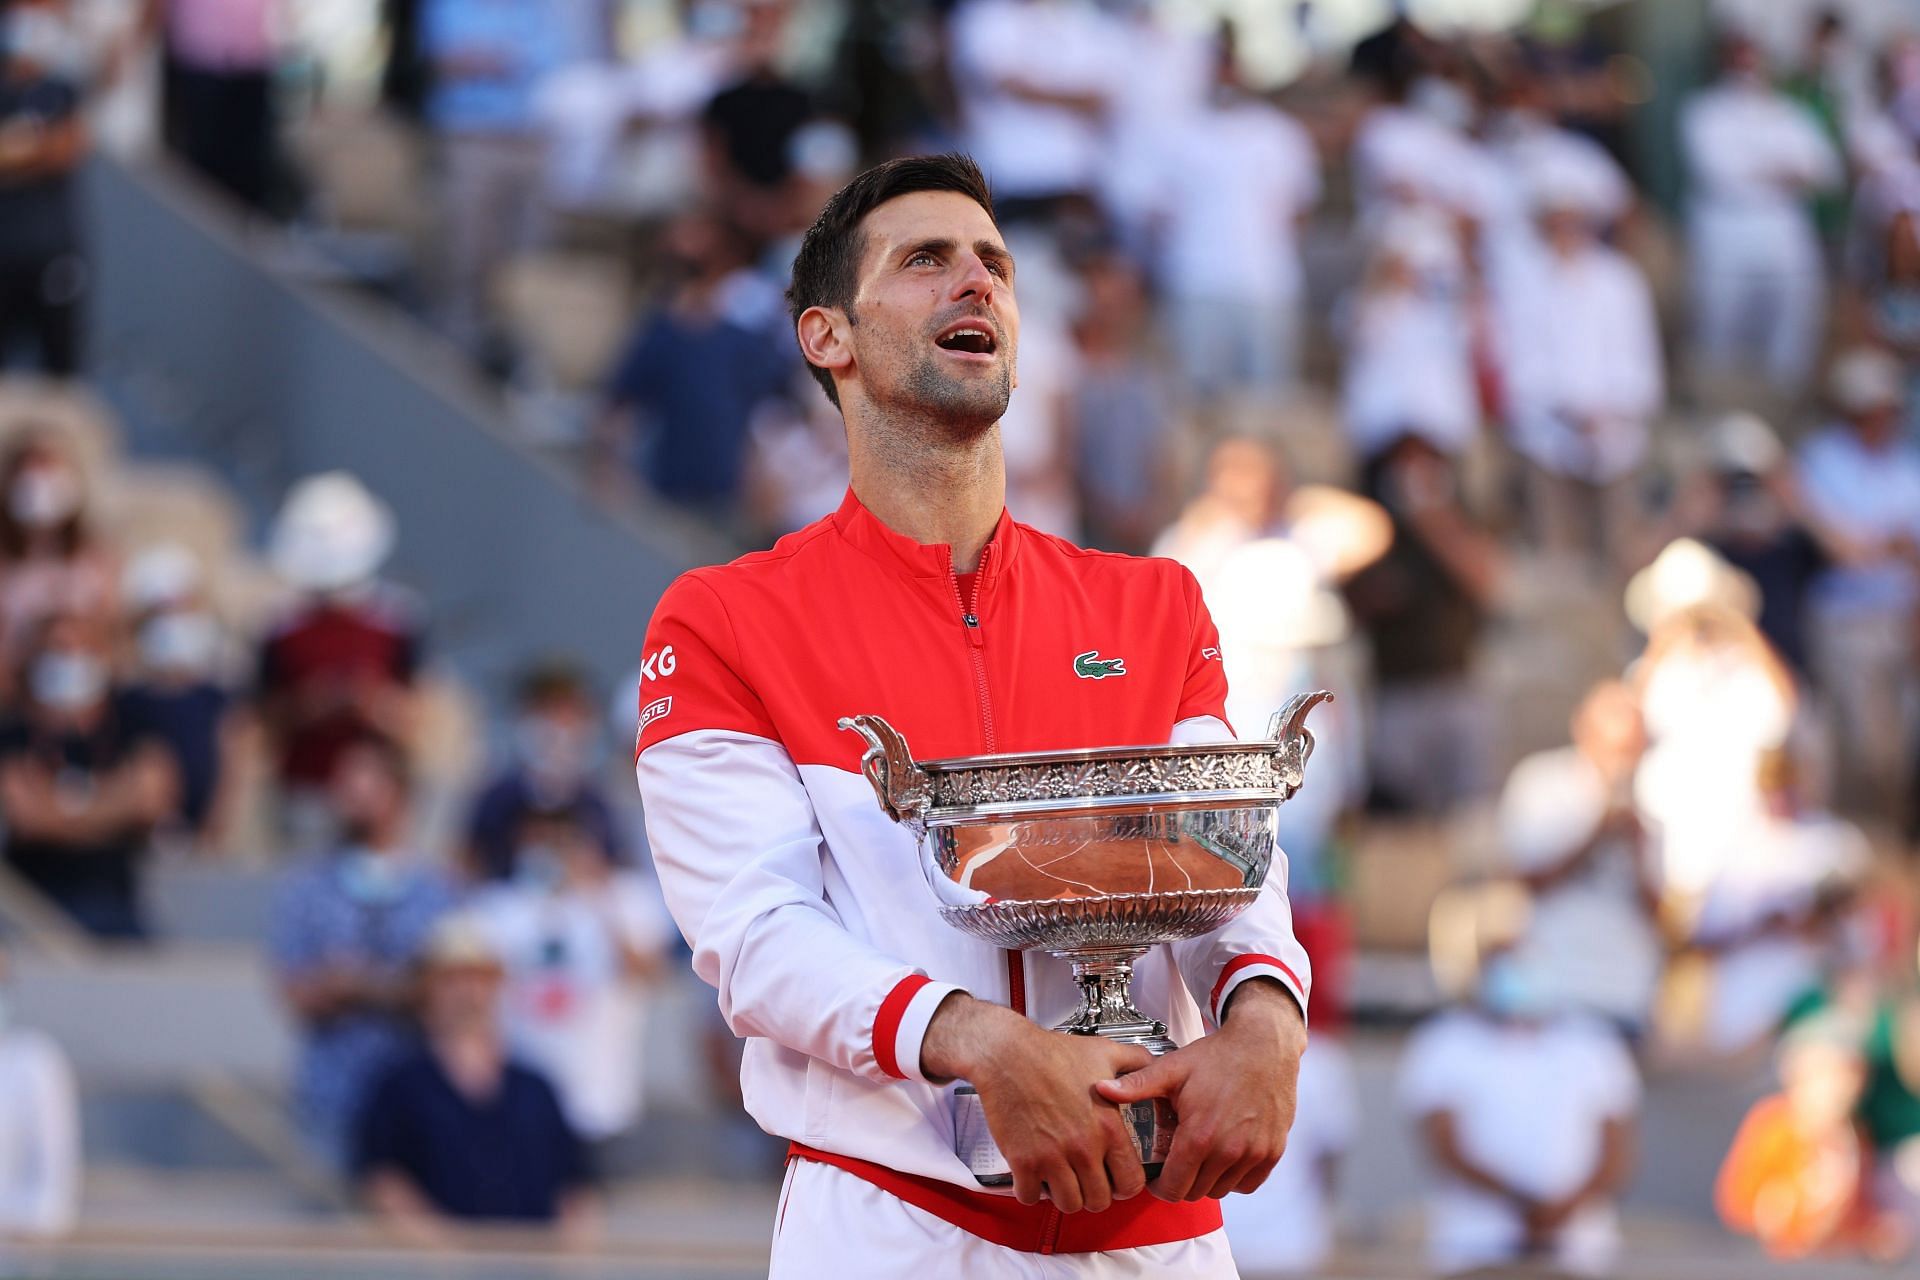 Novak will be the defending champion at the 2022 French Open